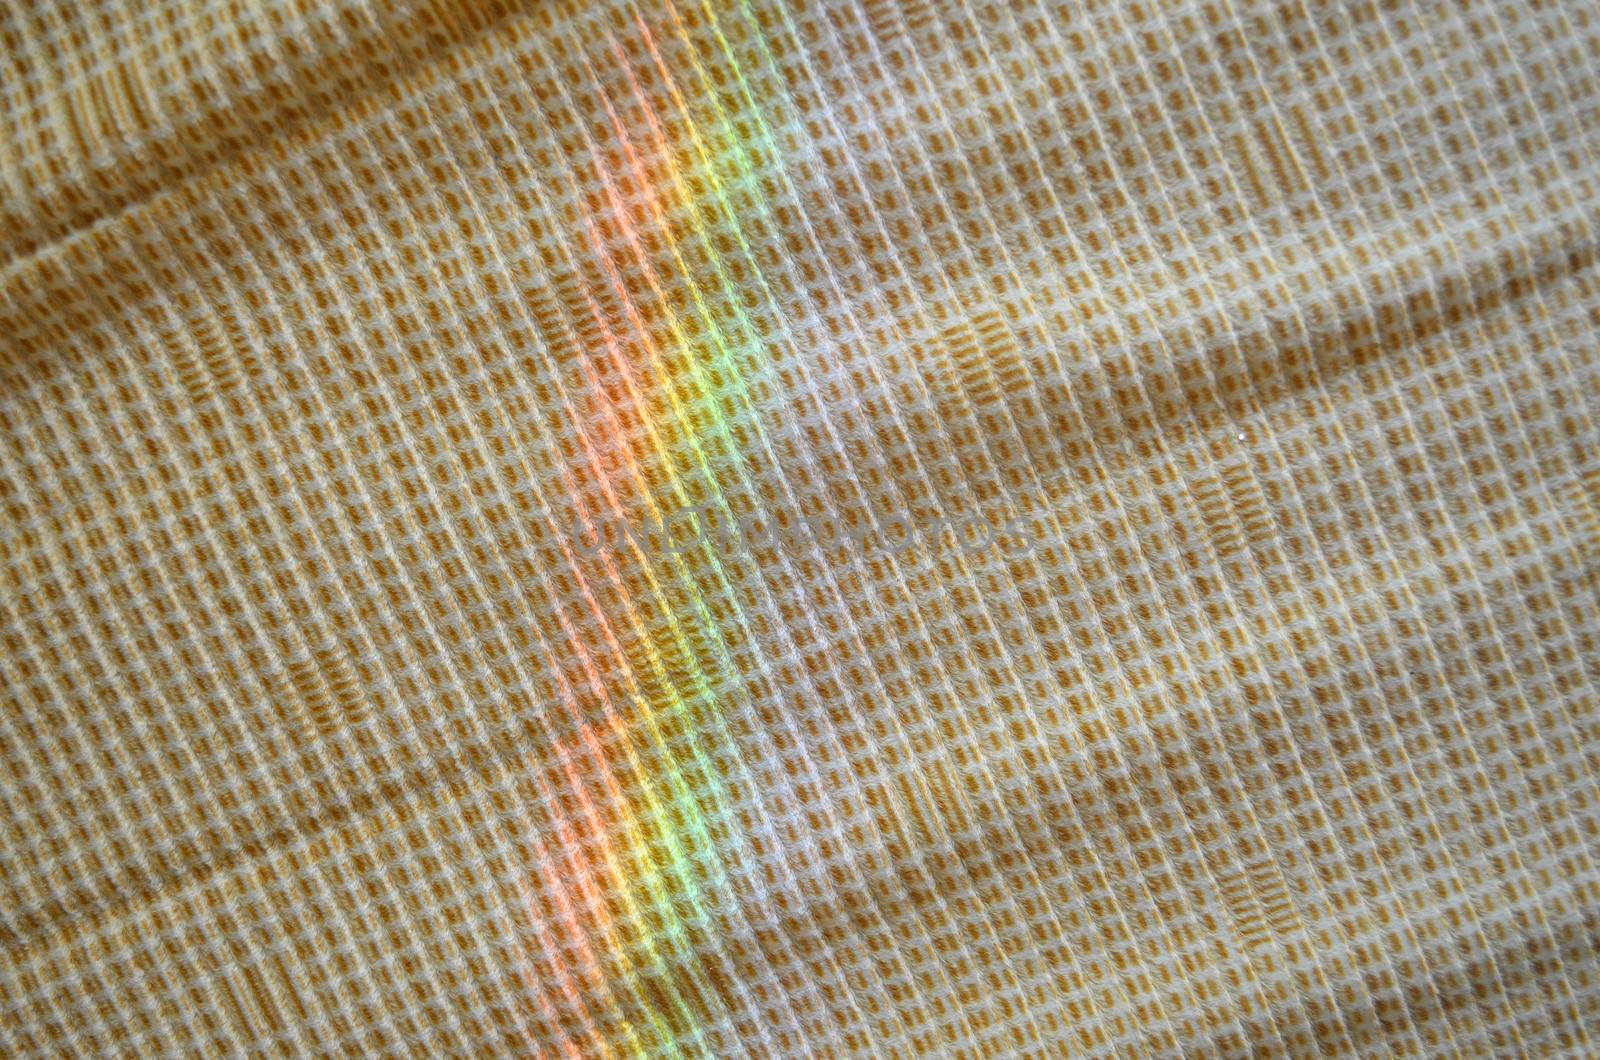 artificial rainbow light on yellow fabric background.